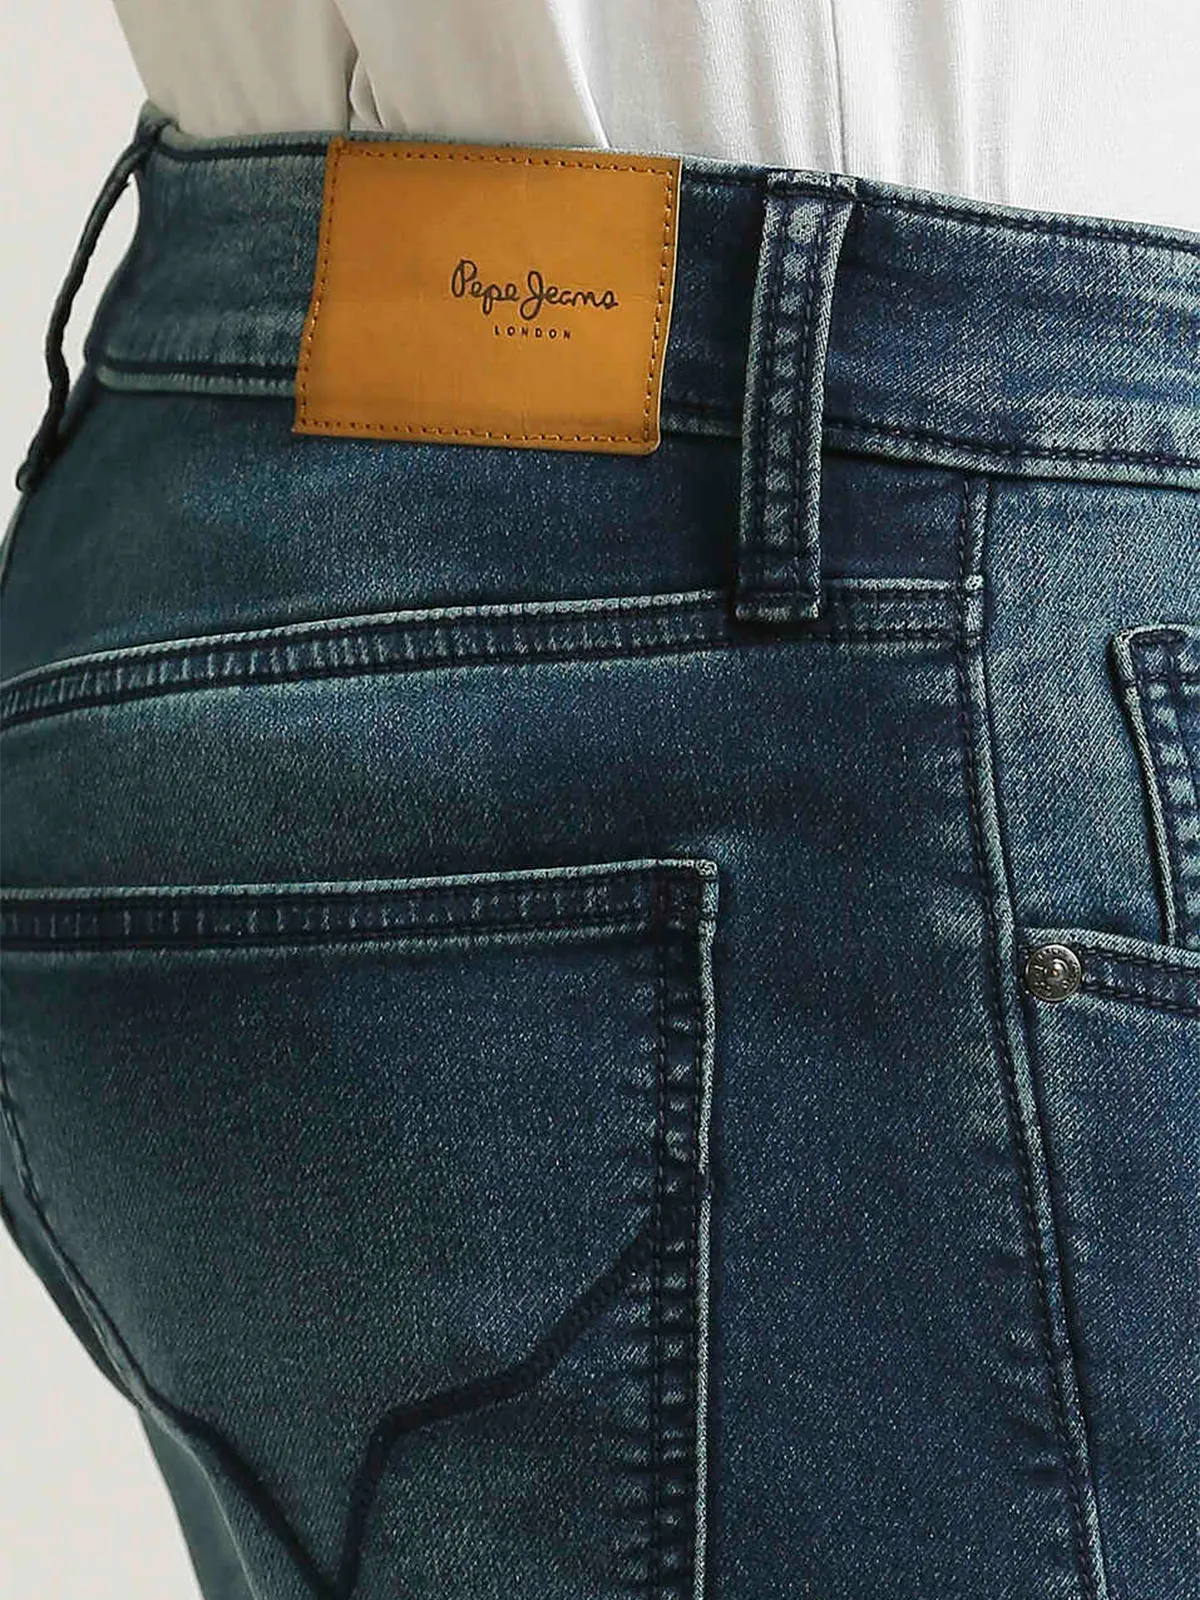 PEPE JEANS blue washed skinny fit jeans